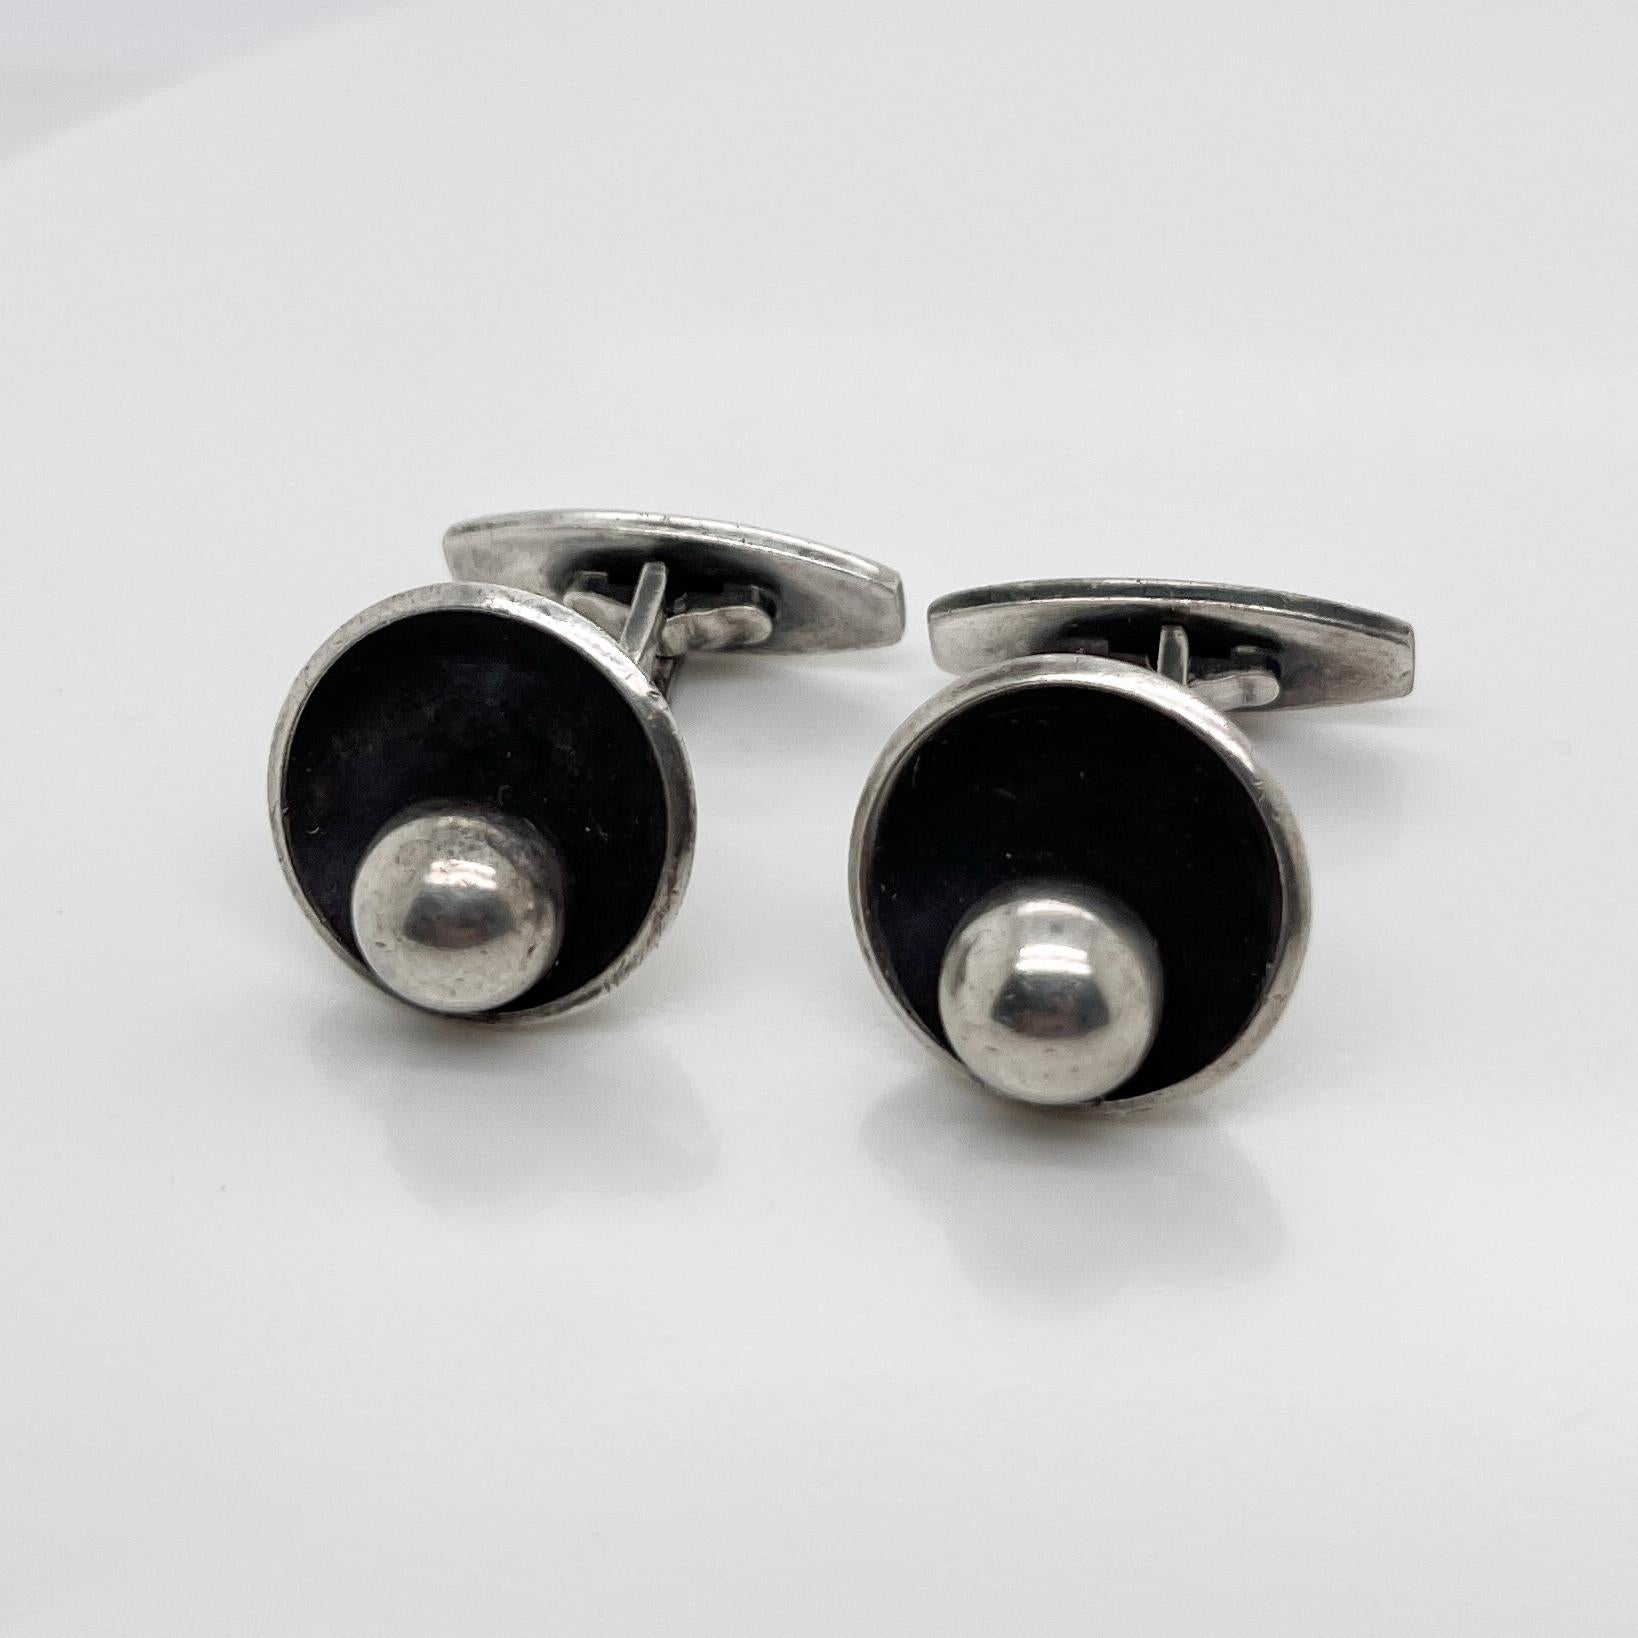 A very fine pair of Hans Hansen Danish Modern sterling silver cufflinks.

Model no. 610.

Each with a round silver ball that is set on the side of a silver bowl form. 

Simply terrific cufflinks from one of the Danish Modern masters!

Date:
20th